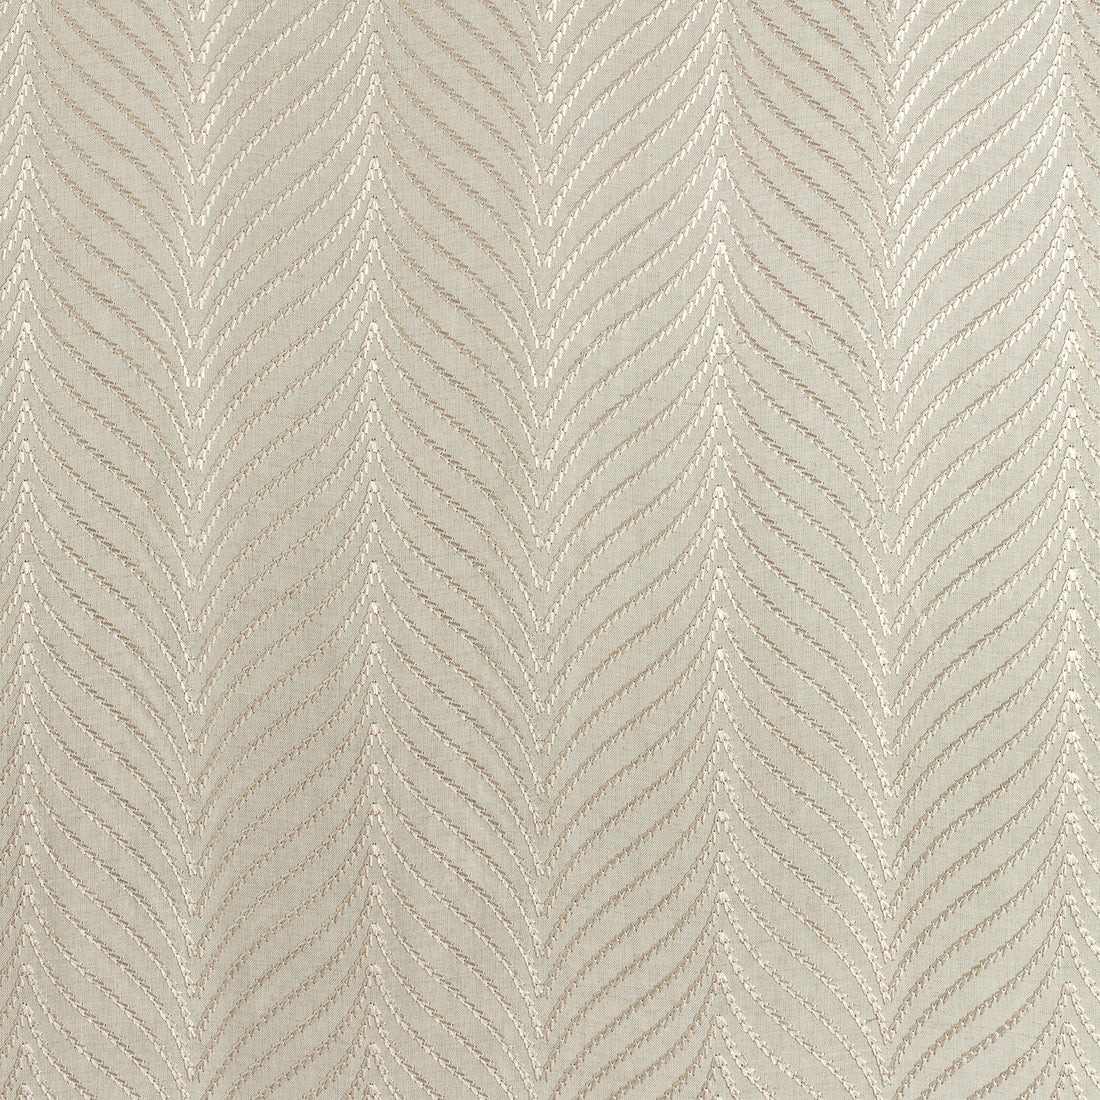 Clayton Herringbone Embroidery fabric in natural color - pattern number W775443 - by Thibaut in the Dynasty collection